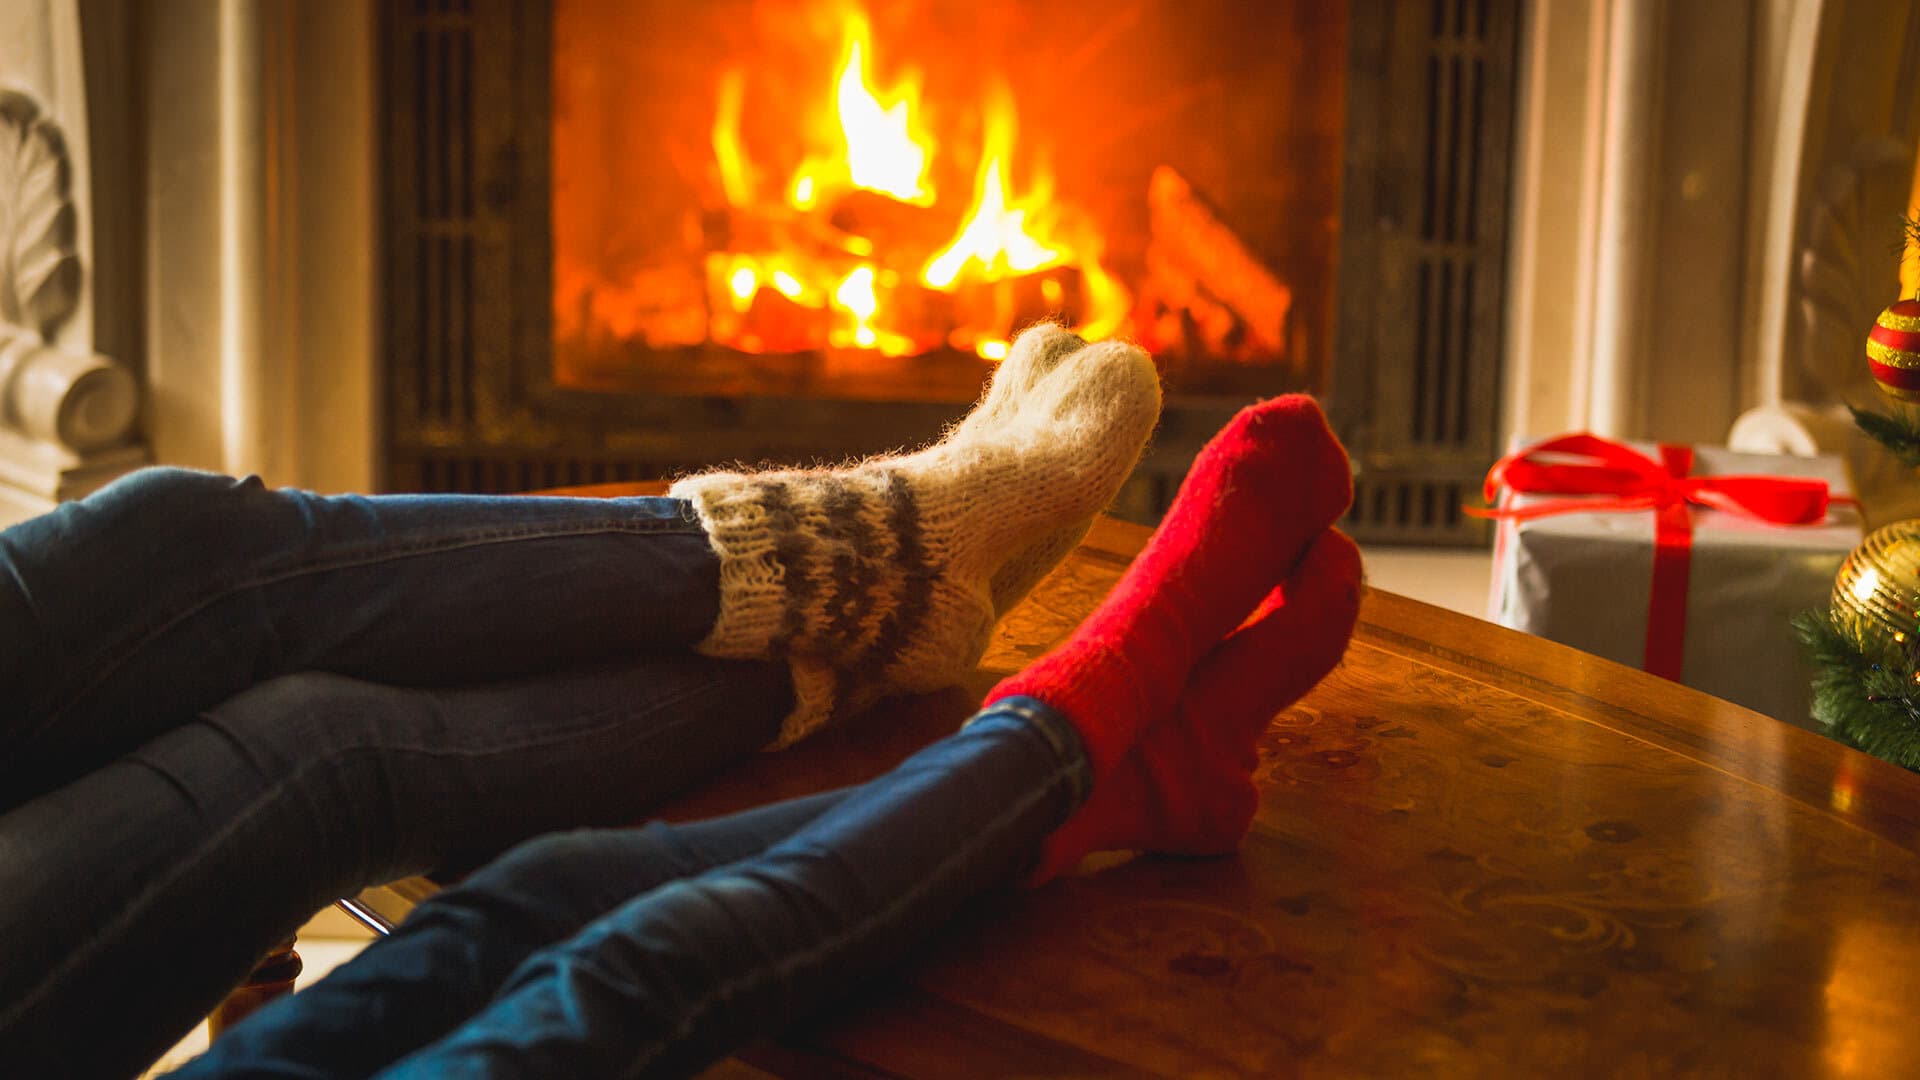 Socks by the fireplace